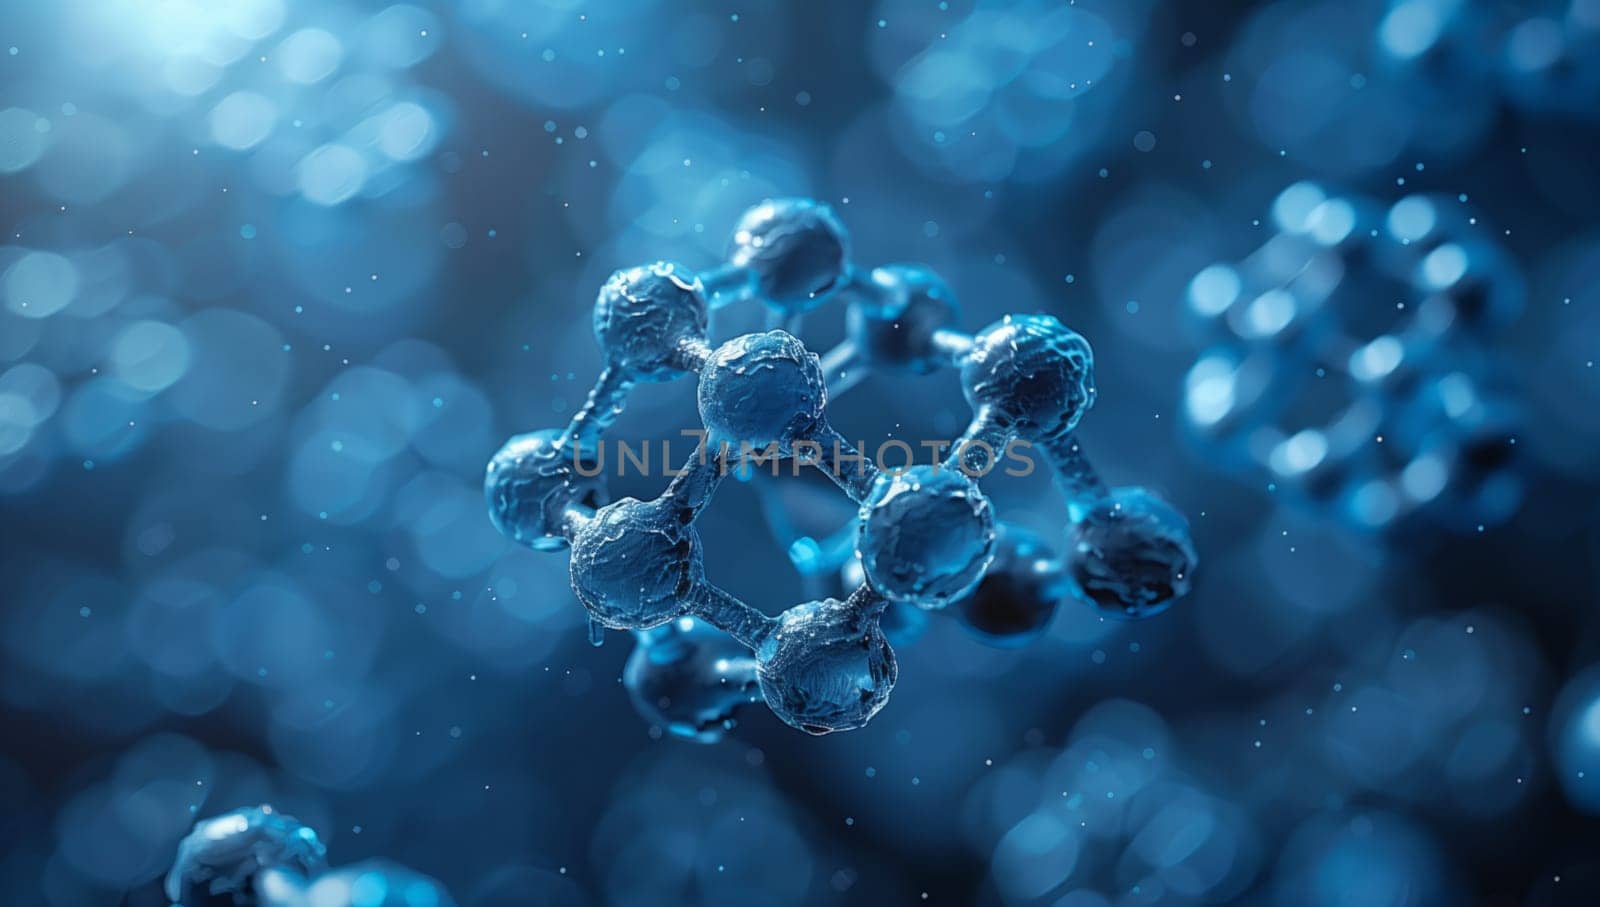 Macro photography of a water molecule on an electric blue background by richwolf